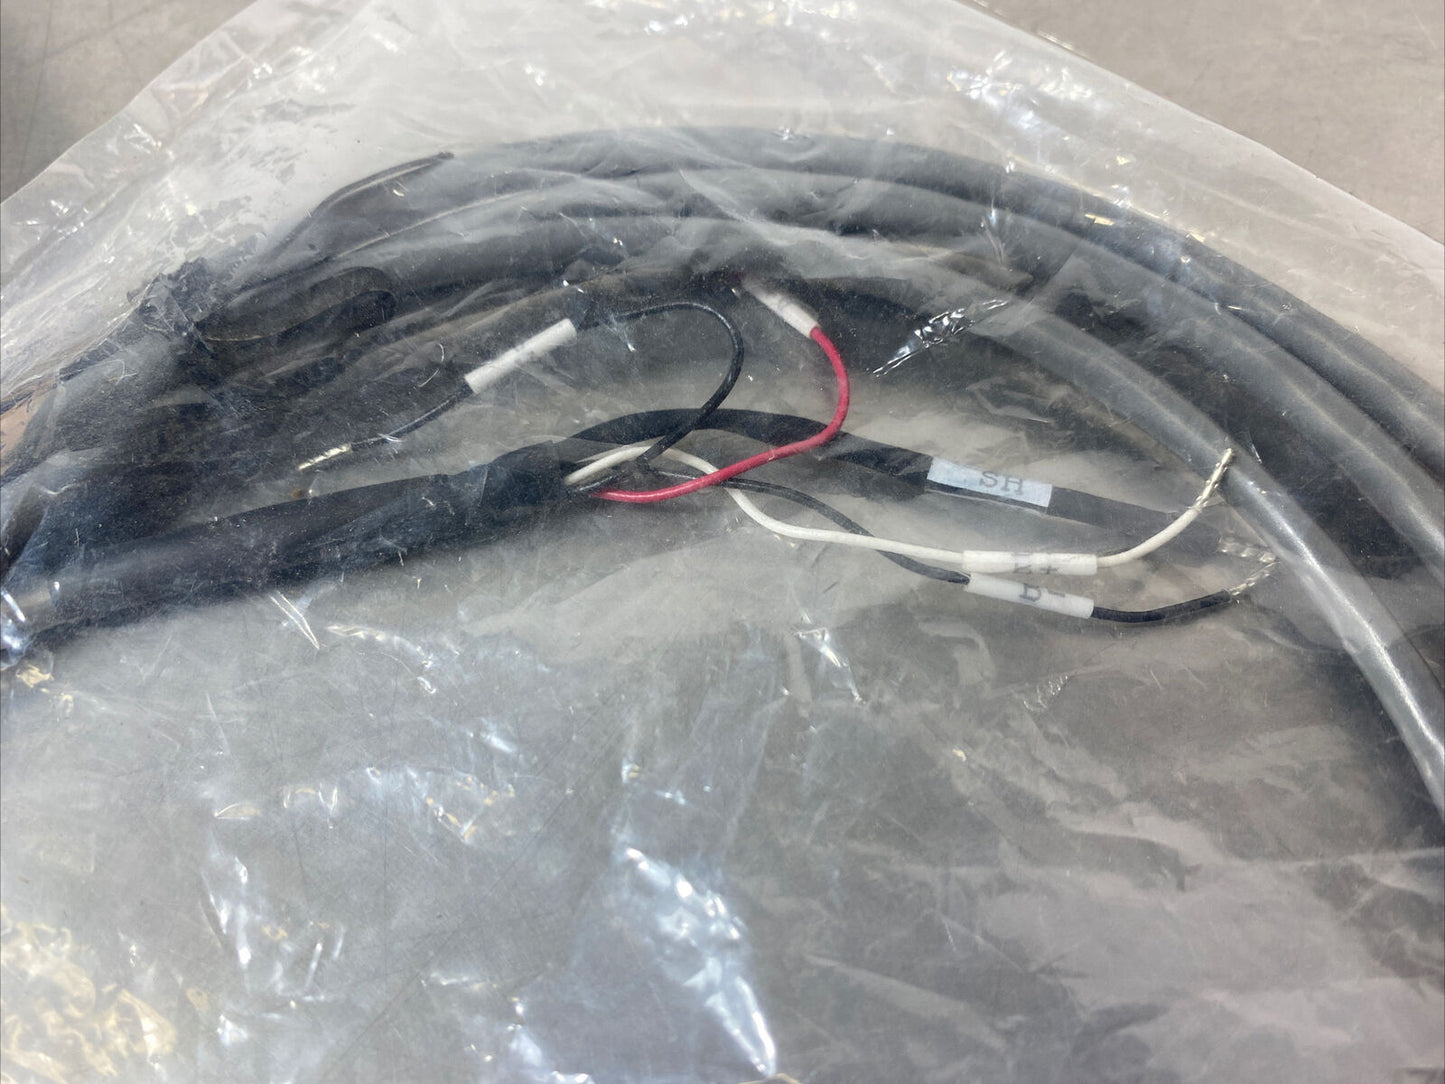 Fanuc CABLE CBL-12-MPS-10A Cable.                    STC2